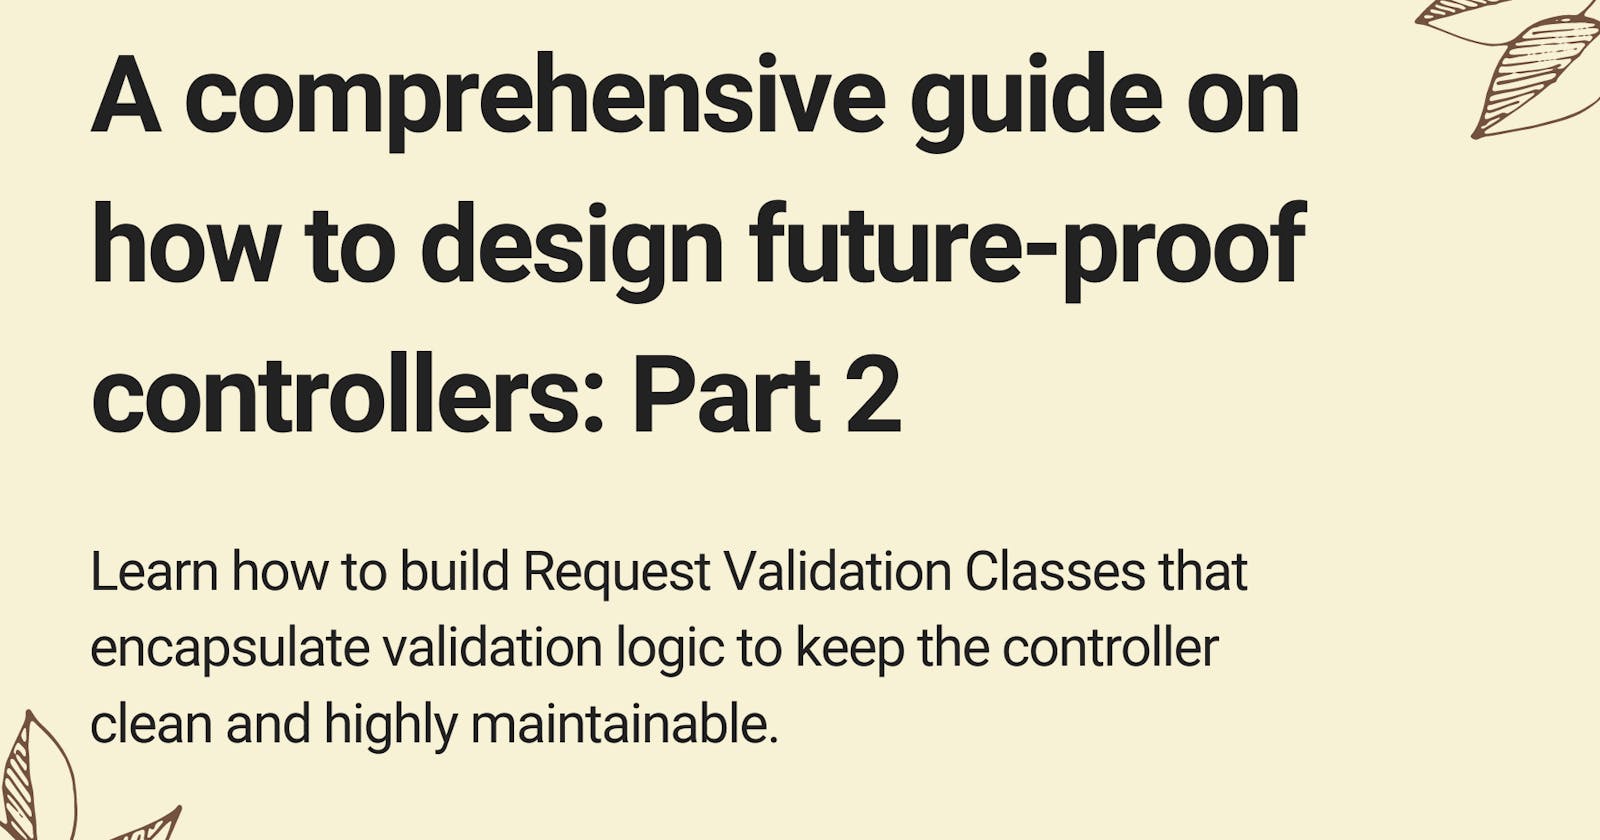 A comprehensive guide on how to design future-proof controllers: Part 2